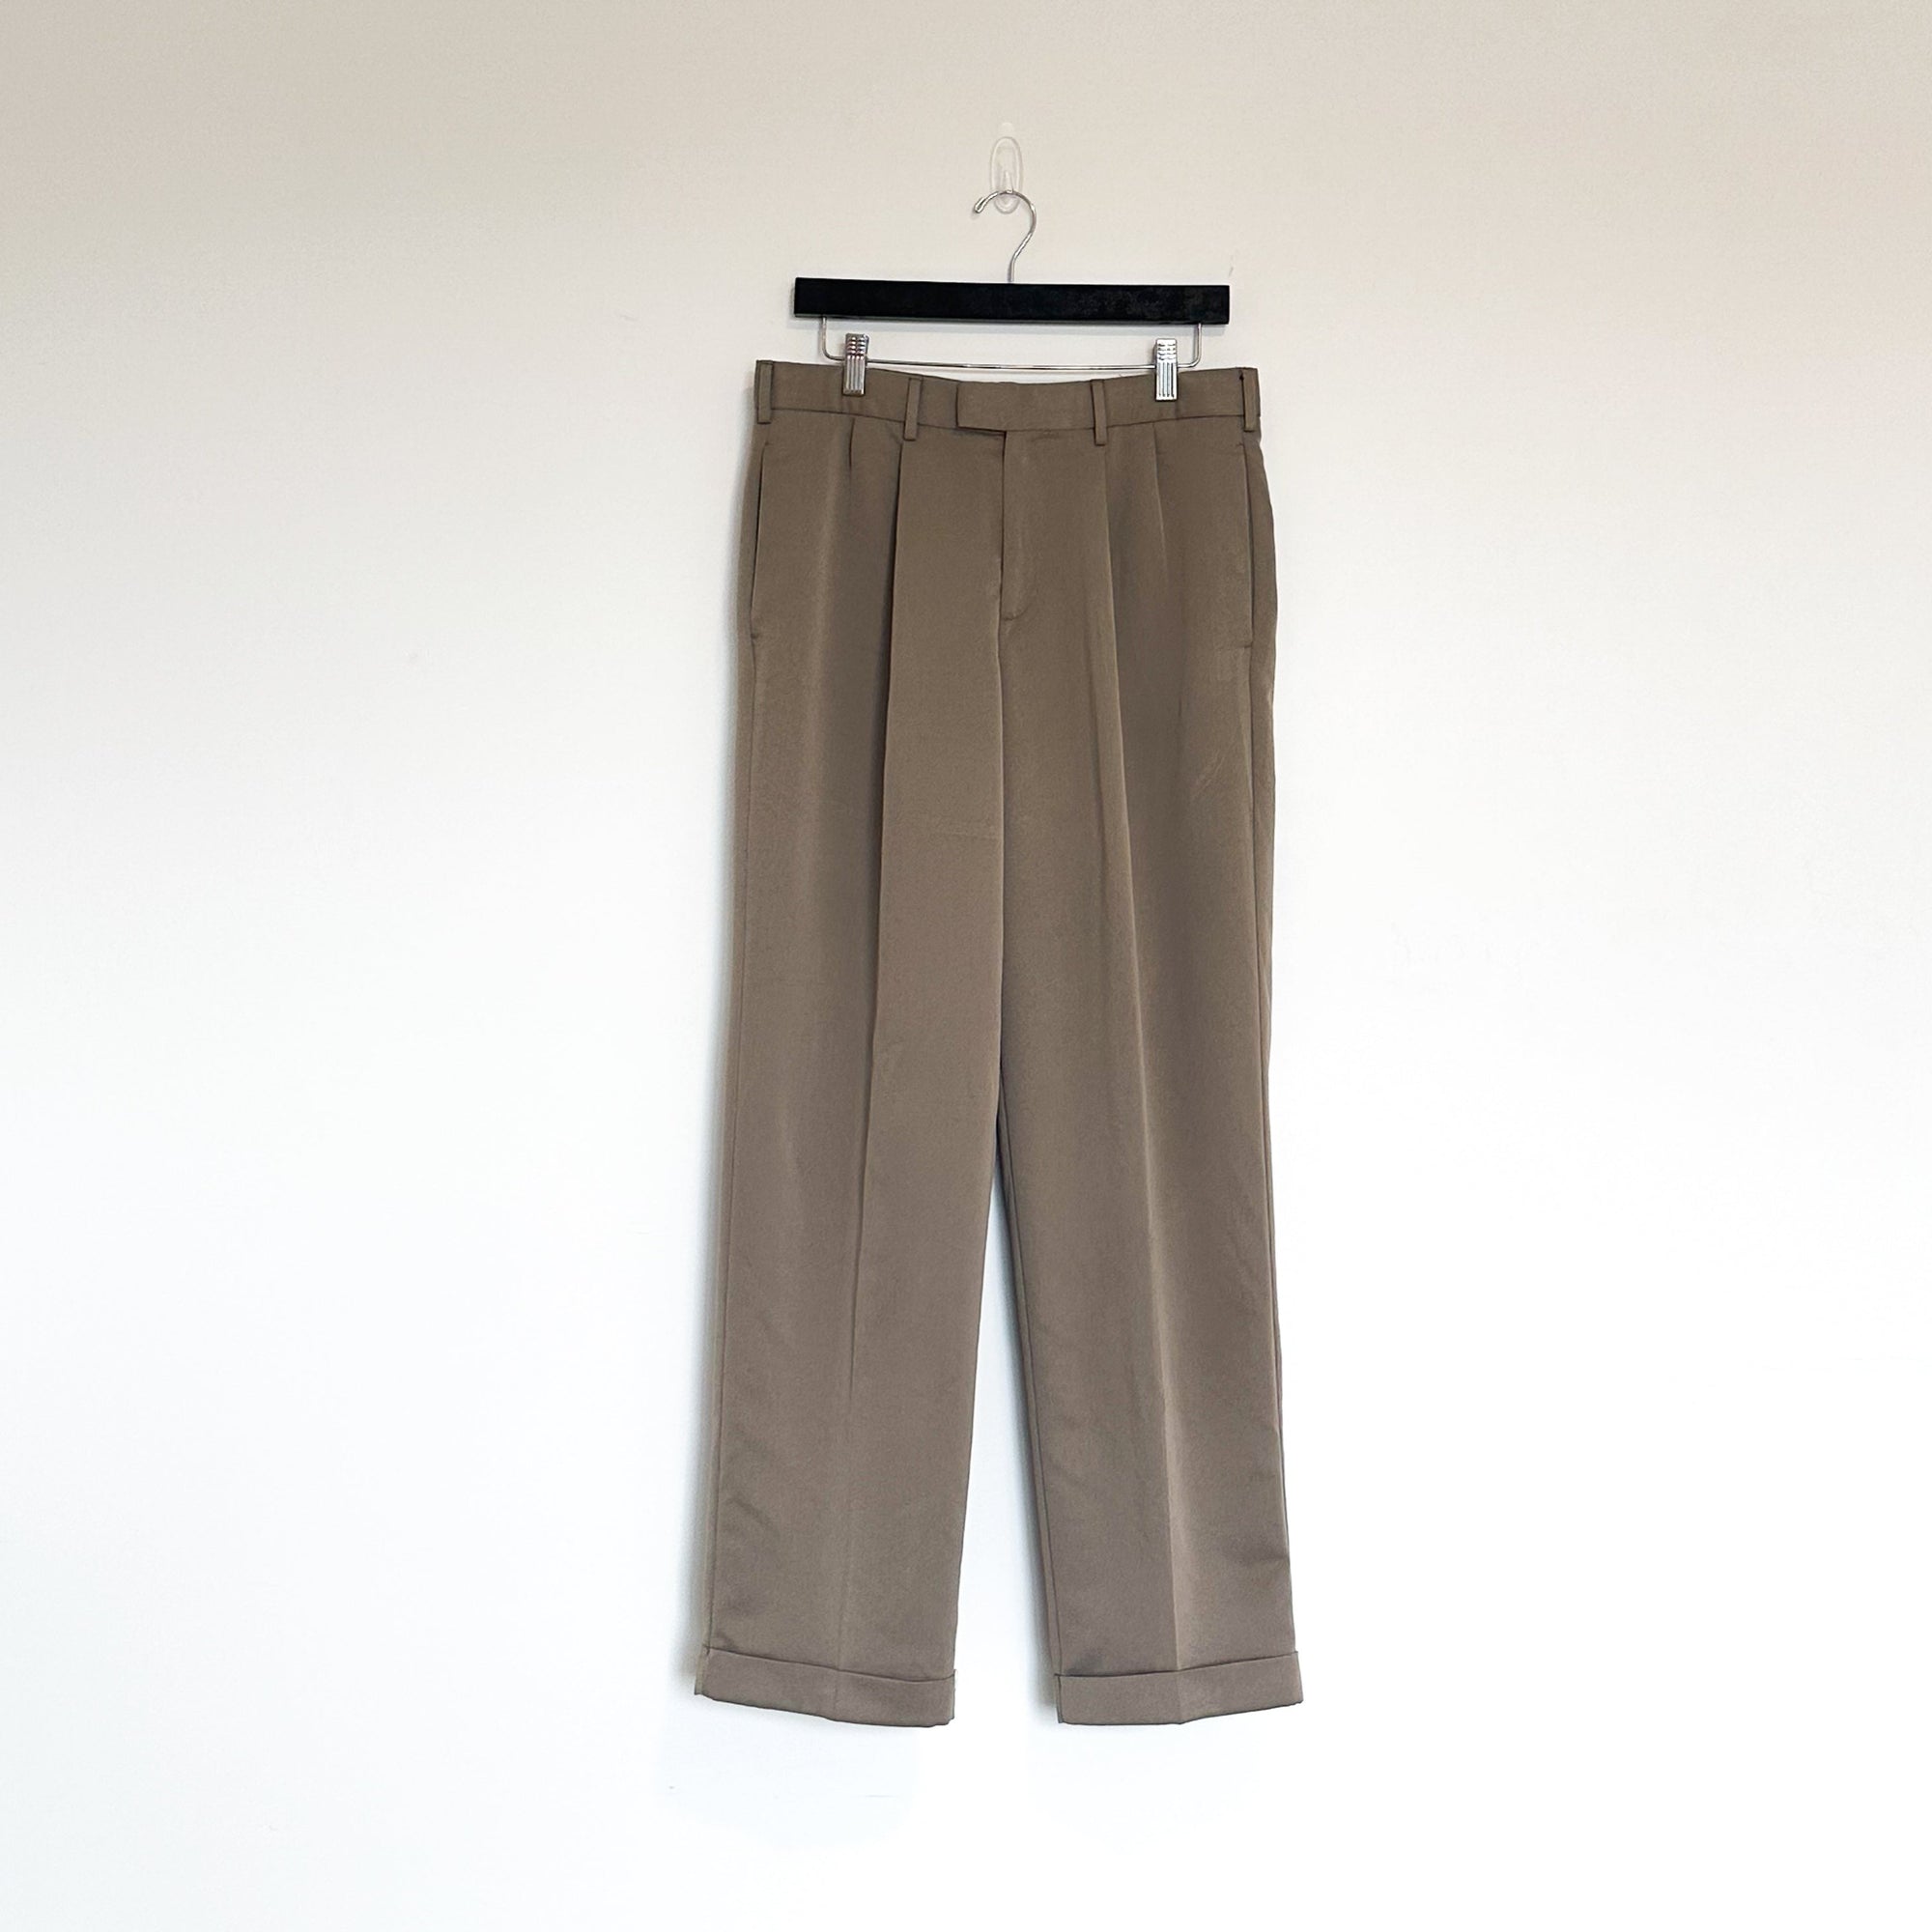 PL Dockers Pleated Pant in Taupe 32X32